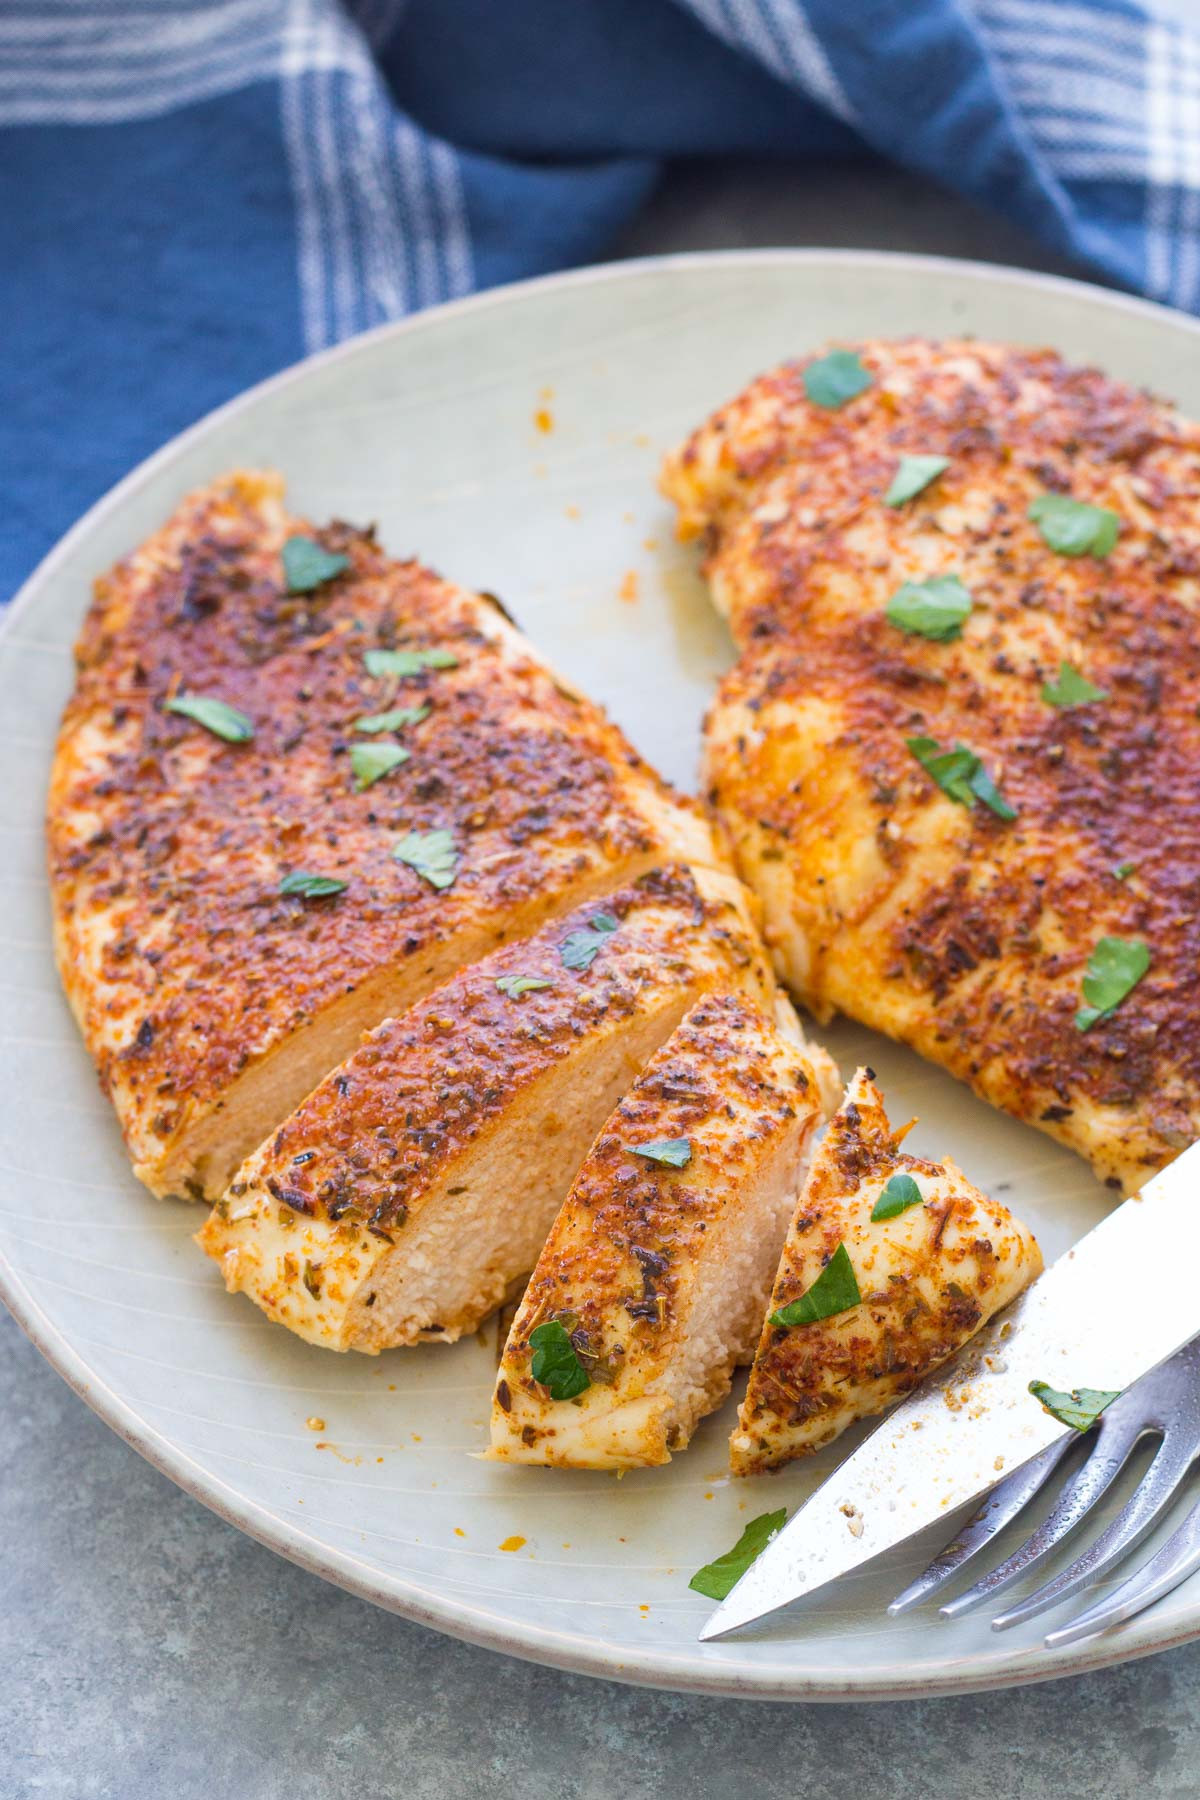 Delicious Baked Stuffed Chicken Breast Recipes